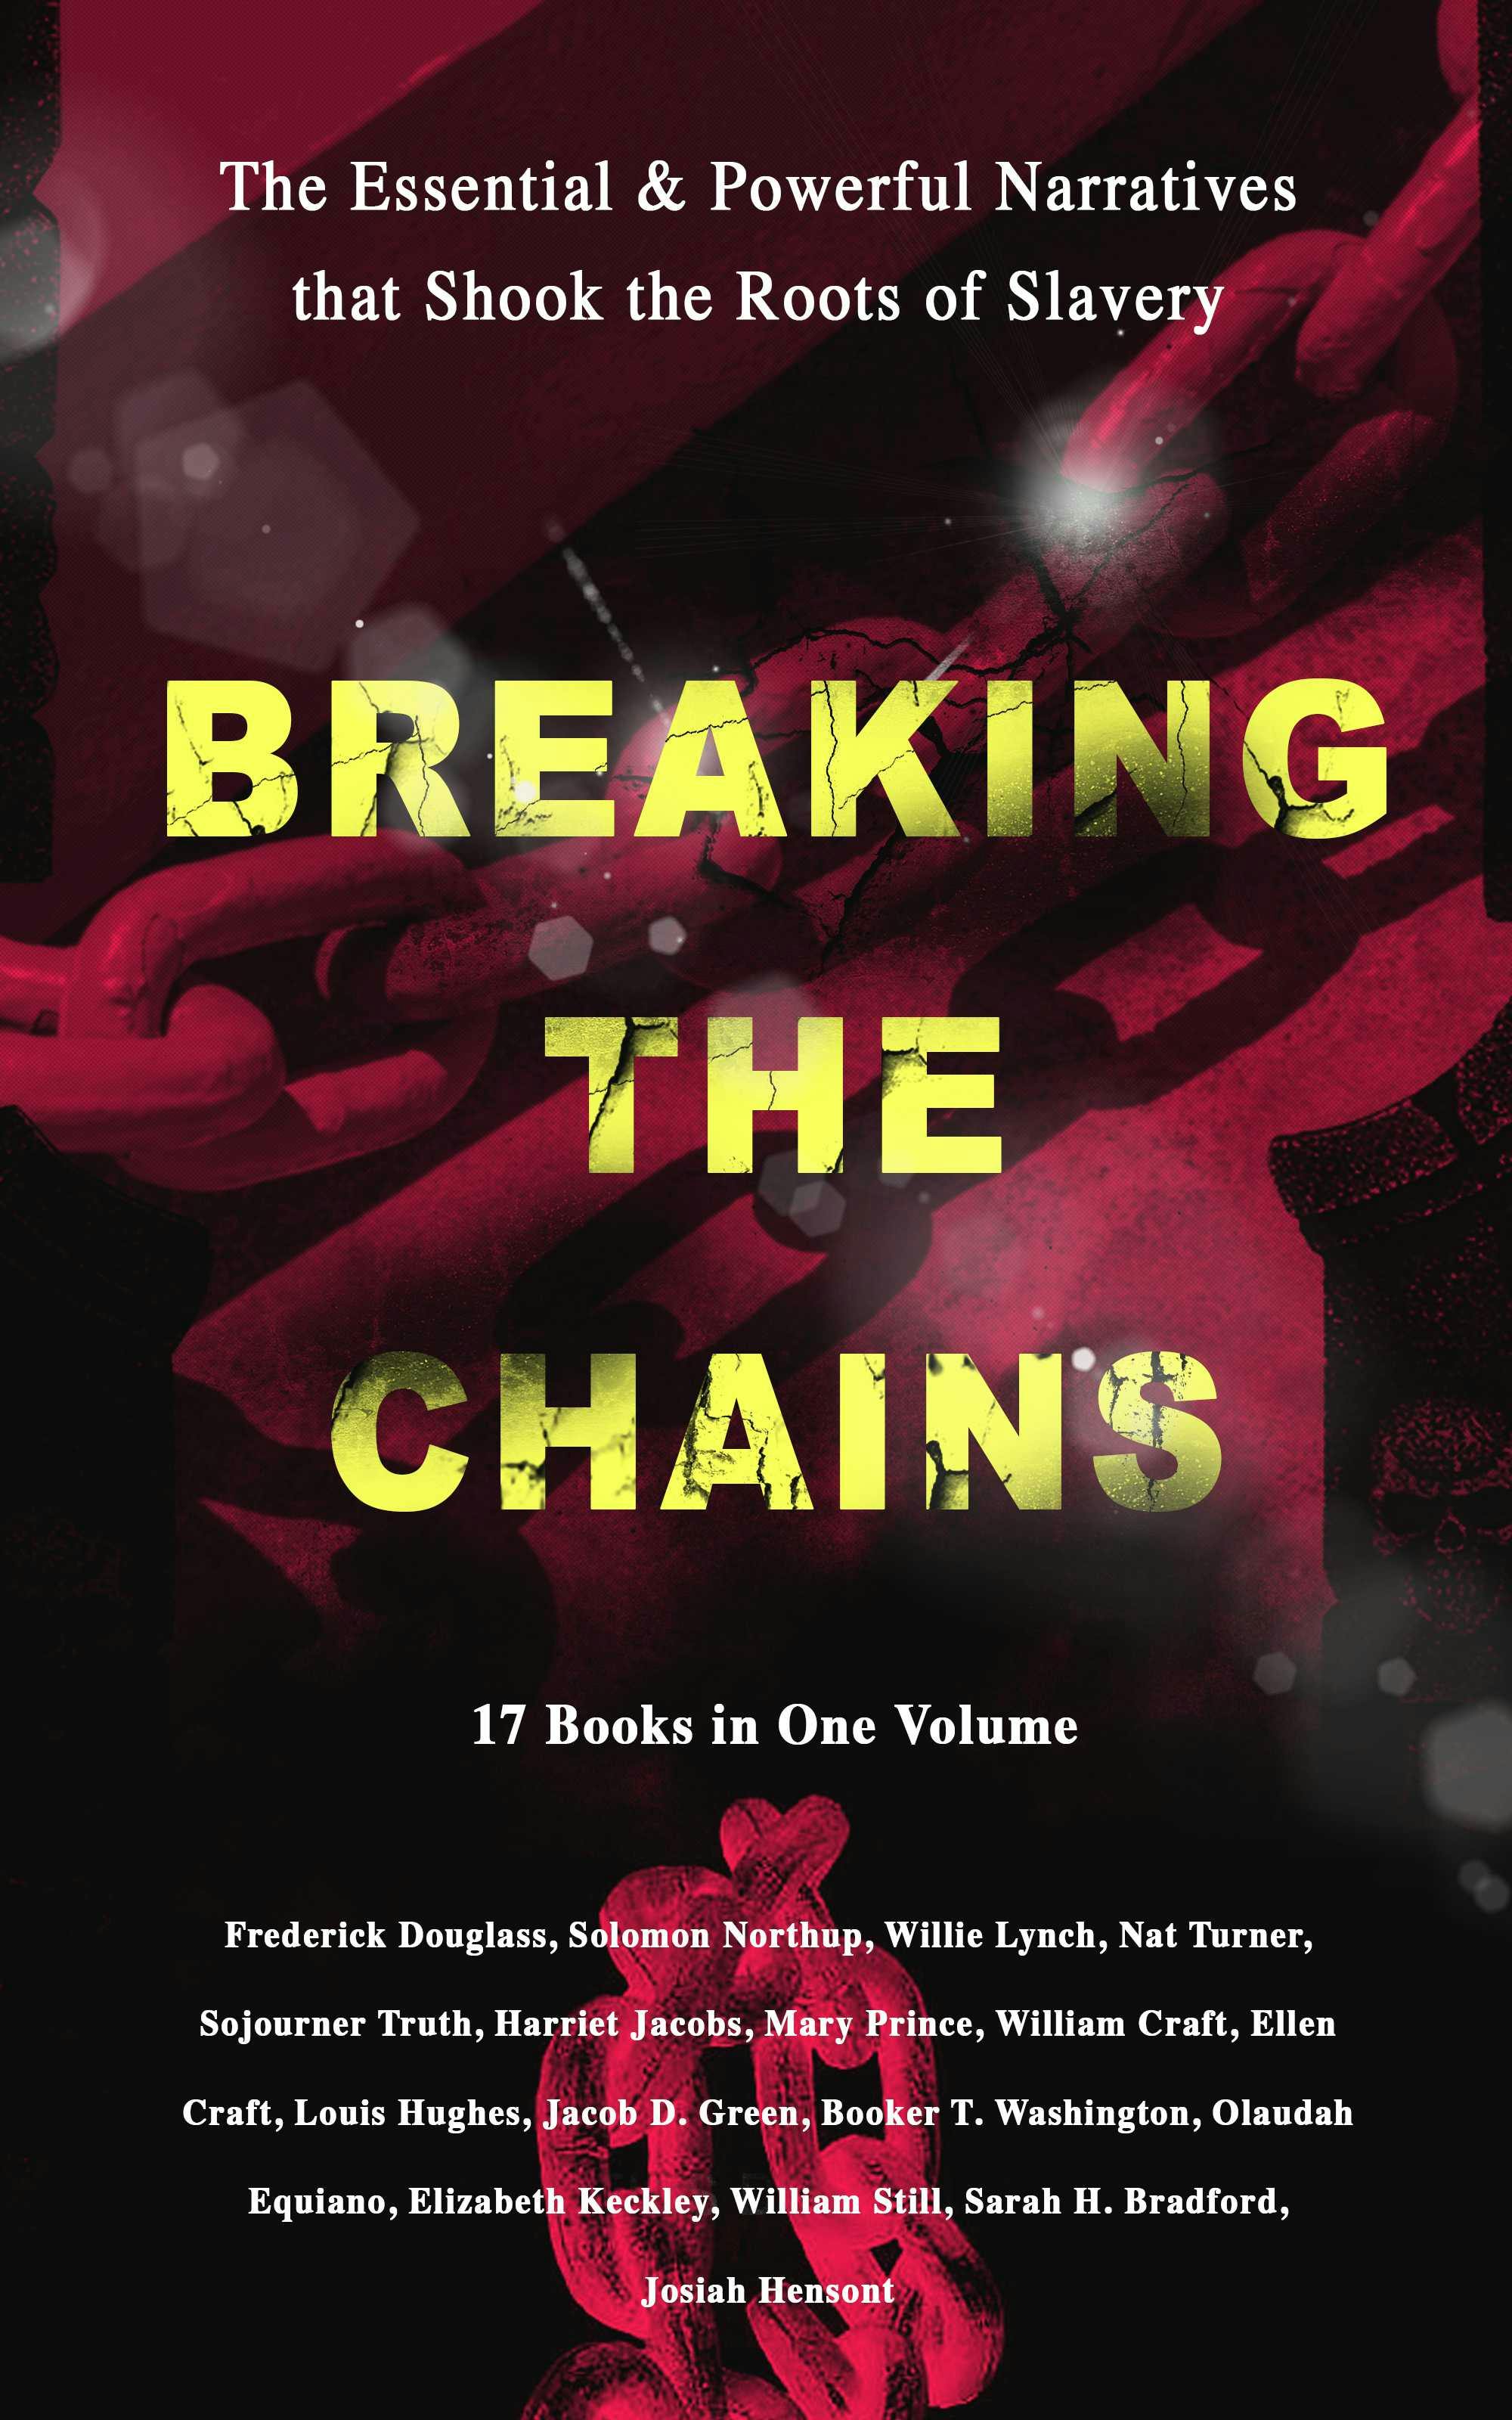 BREAKING THE CHAINS – The Essential & Powerful Narratives that Shook the Roots of Slavery (17 Books in One Volume): Memoirs of Frederick Douglass, Underground Railroad, 12 Years a Slave, Incidents in Life of a Slave Girl, Narrative of Sojourner Truth, Running A Thousand Miles for Freedom and many more - undefined